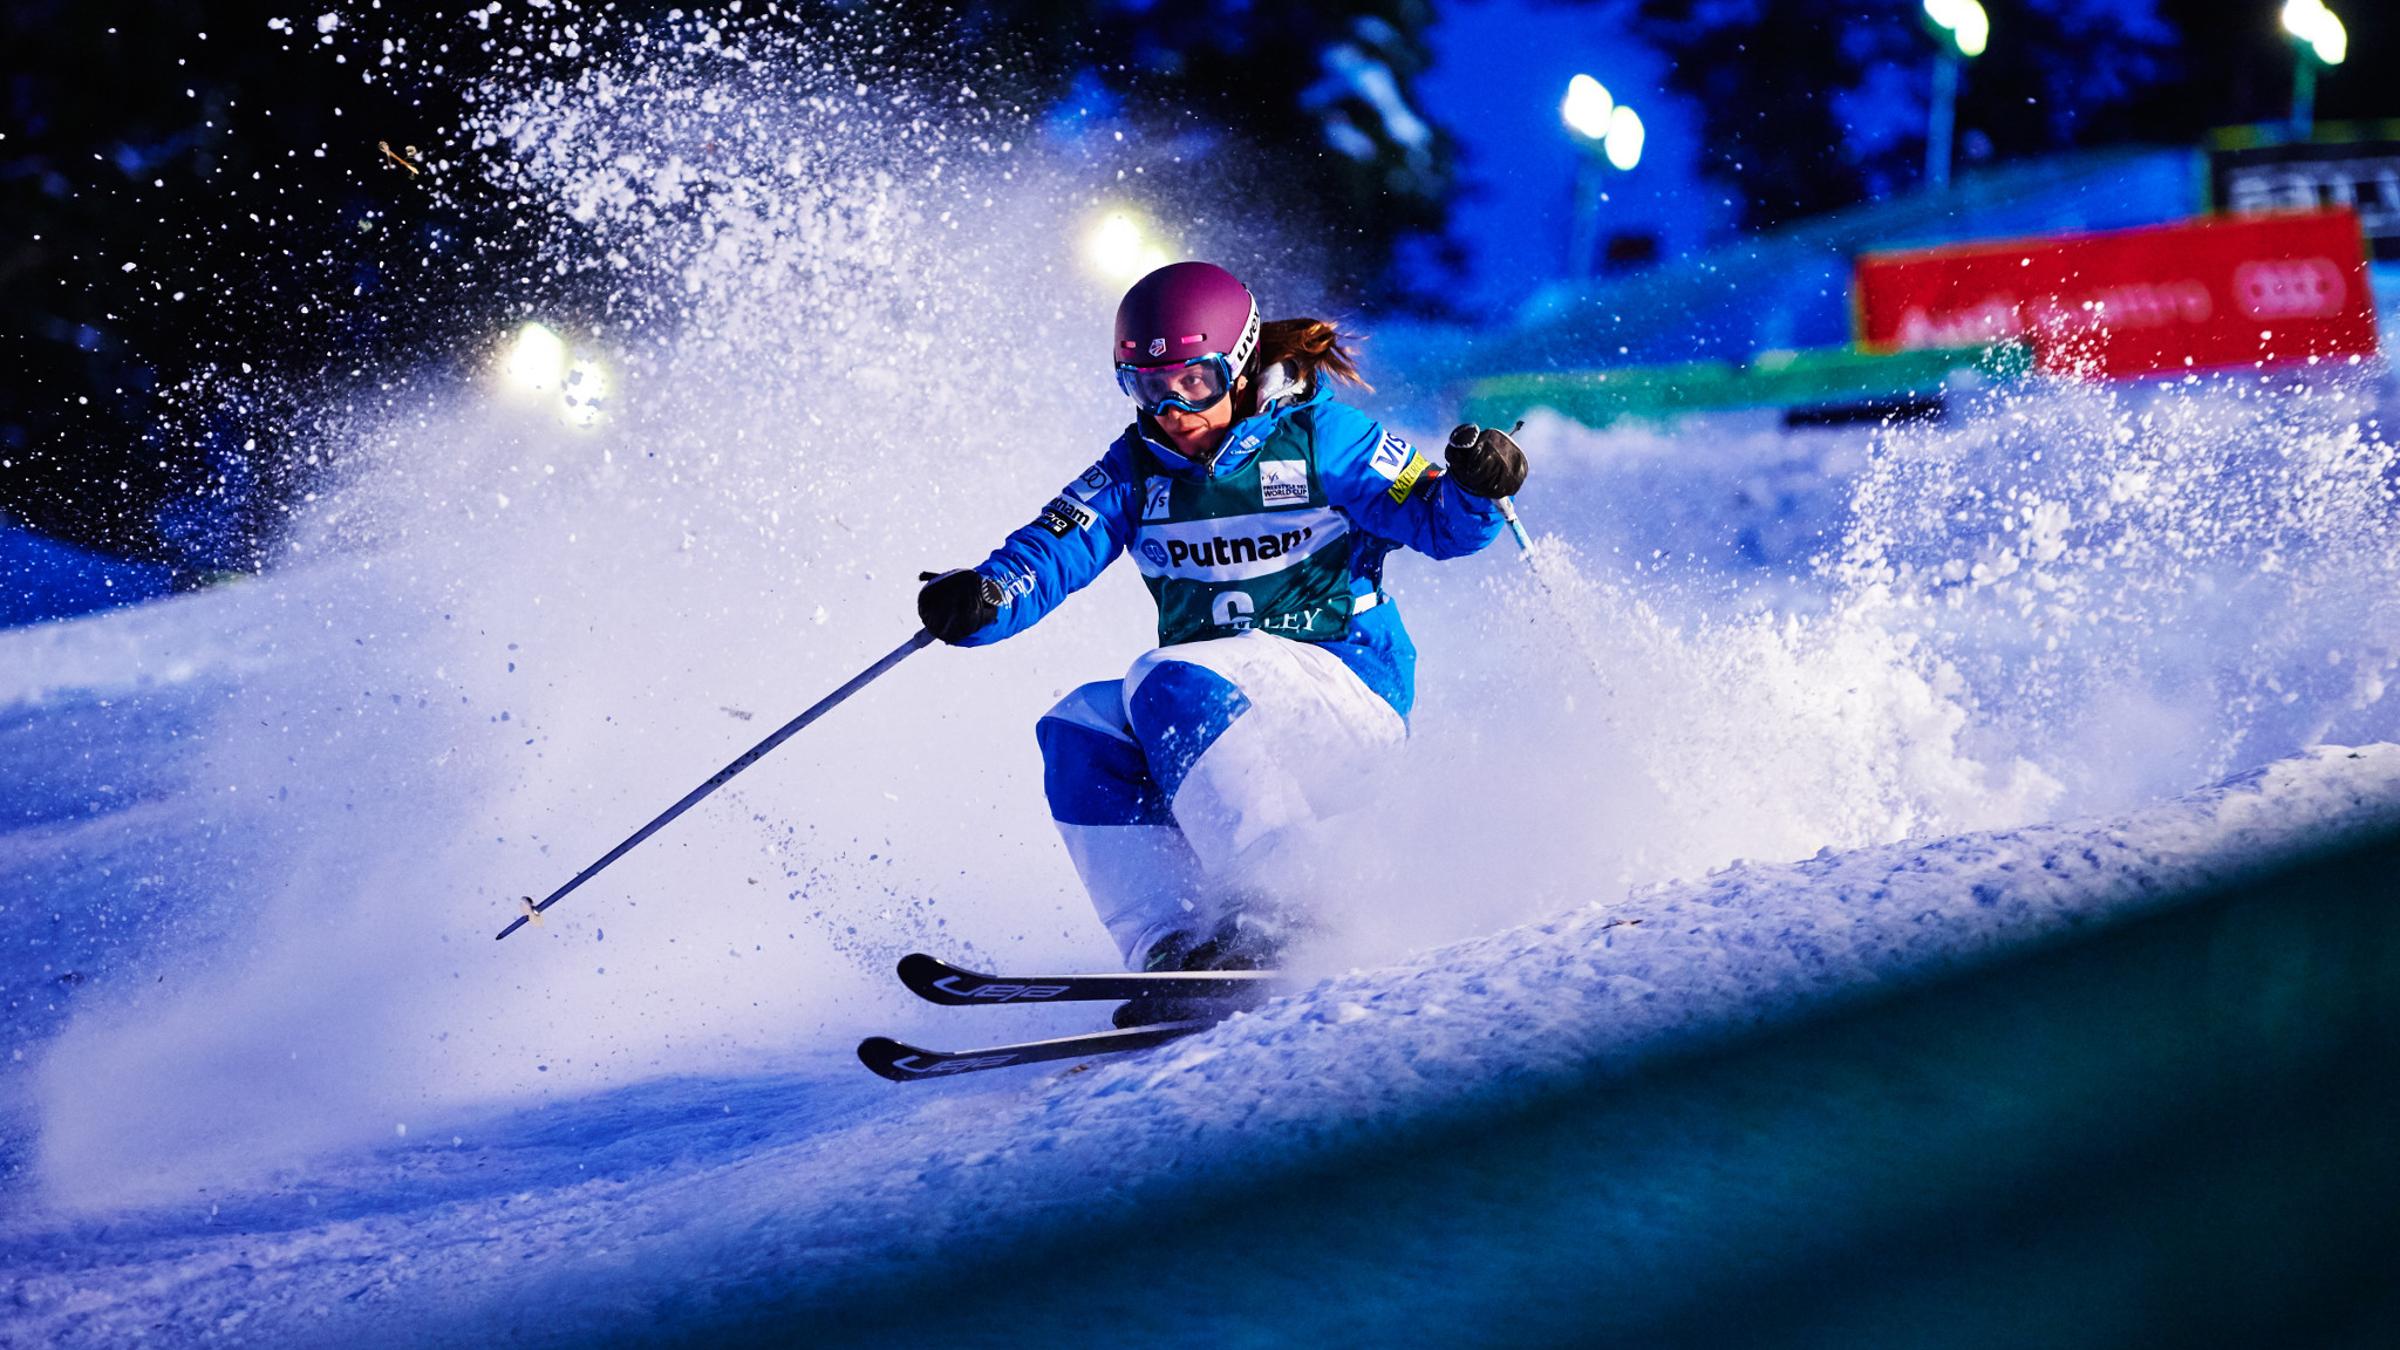 World Cup mogul competition at night